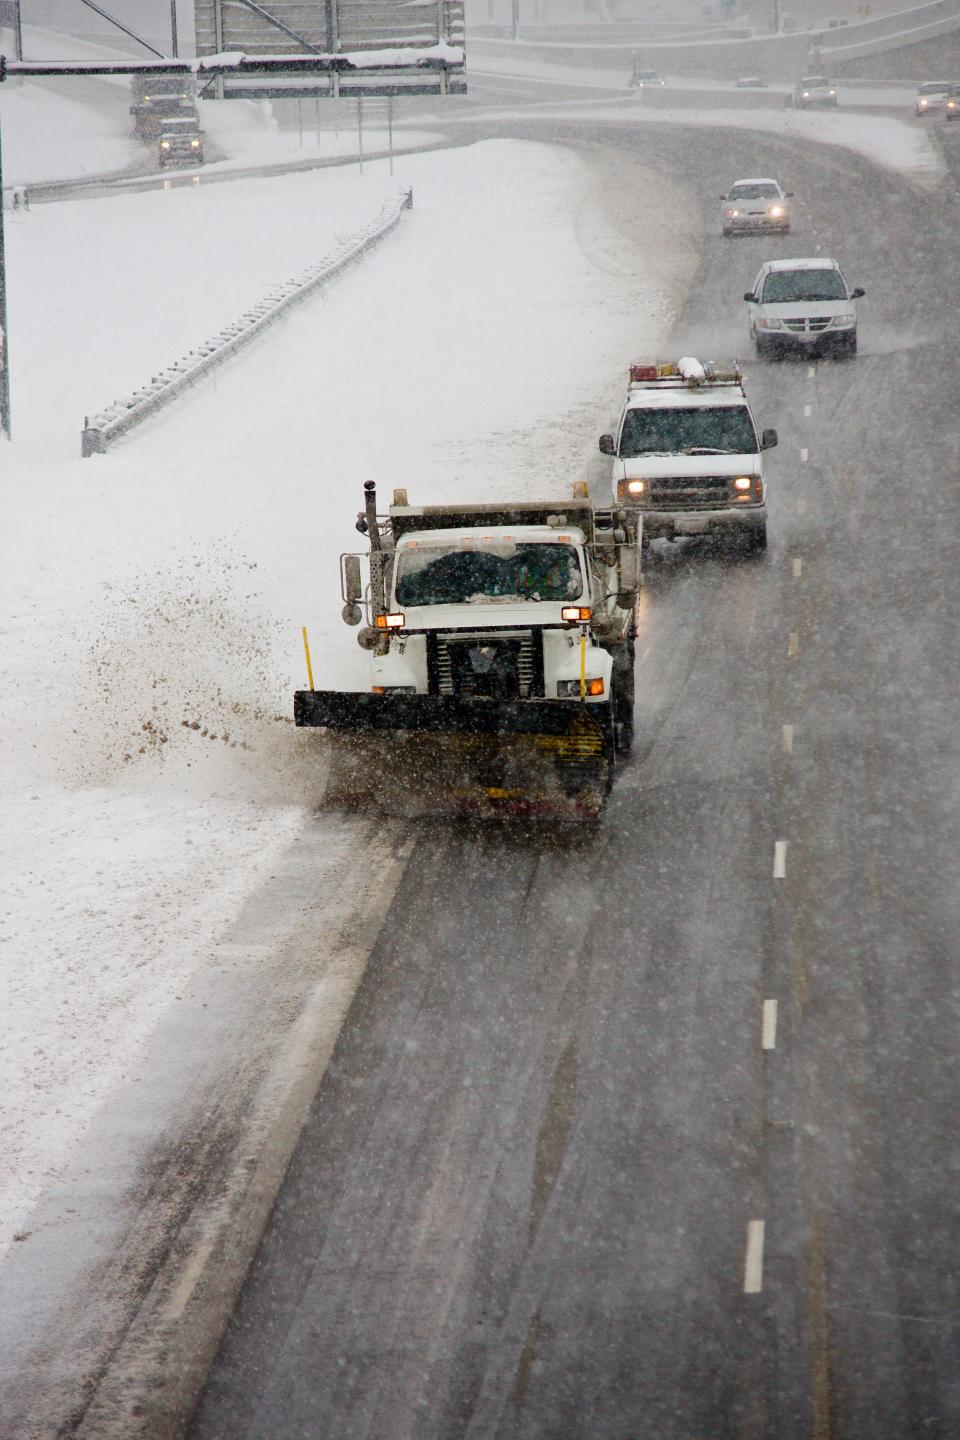 Ohio Department of Transportation snowplows clear the way.